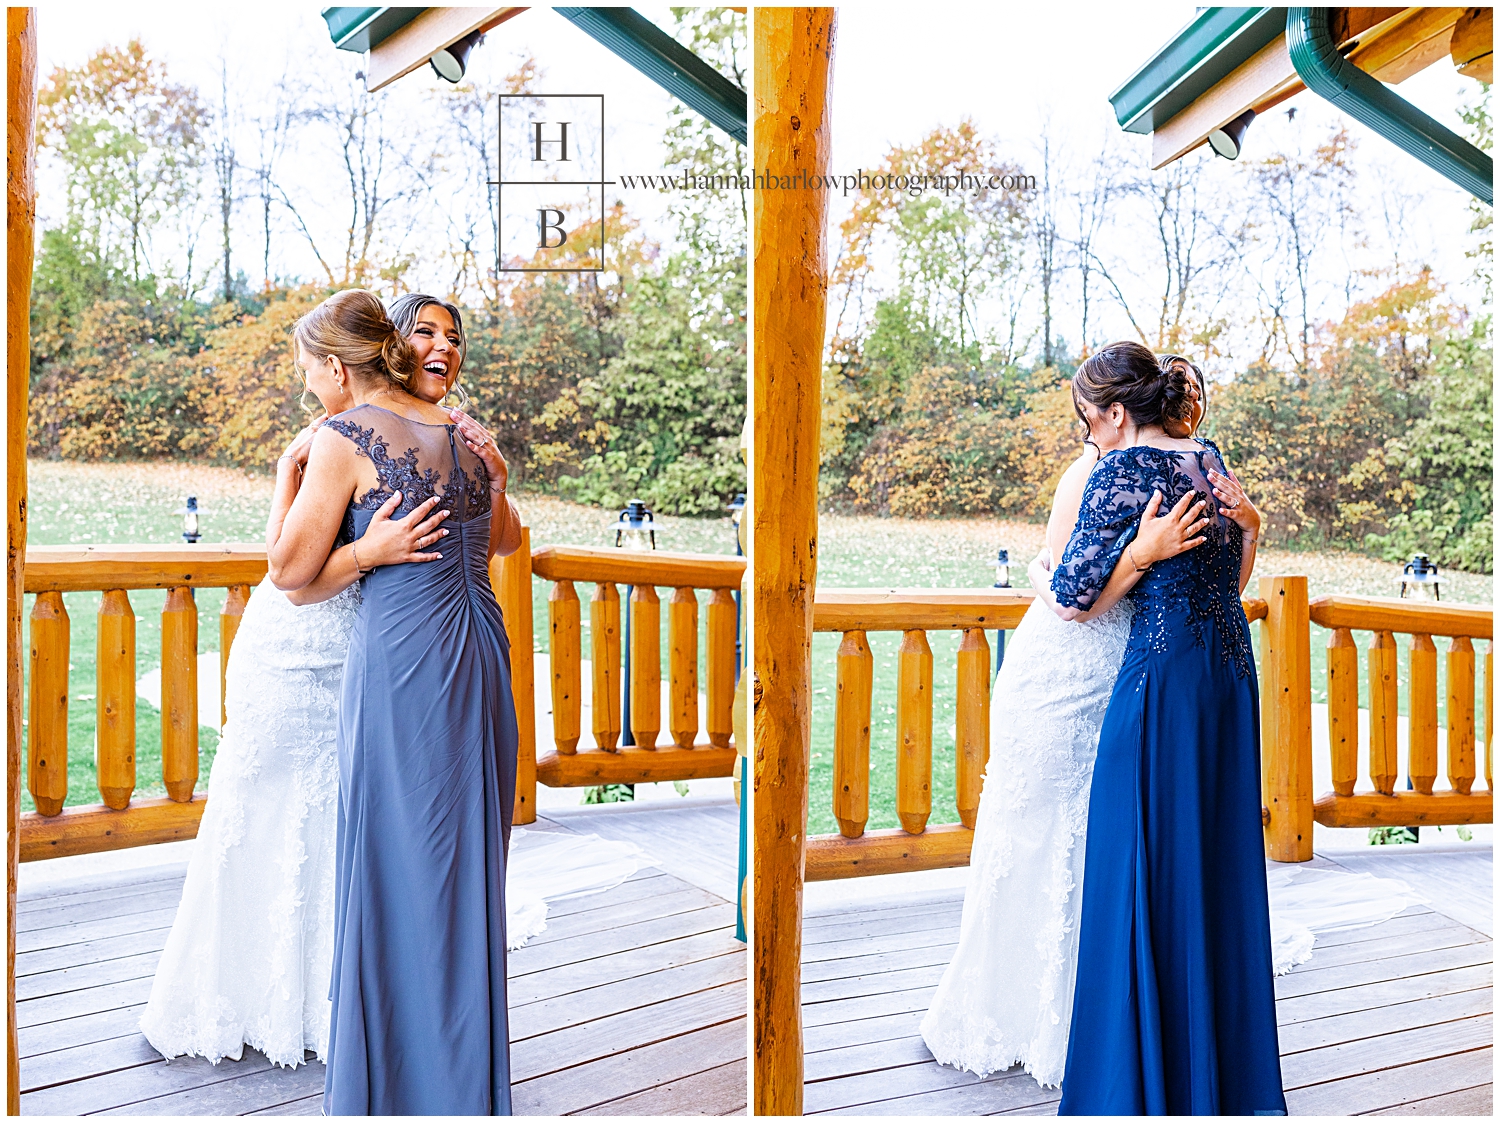 Mothers give the bride a hug on porch